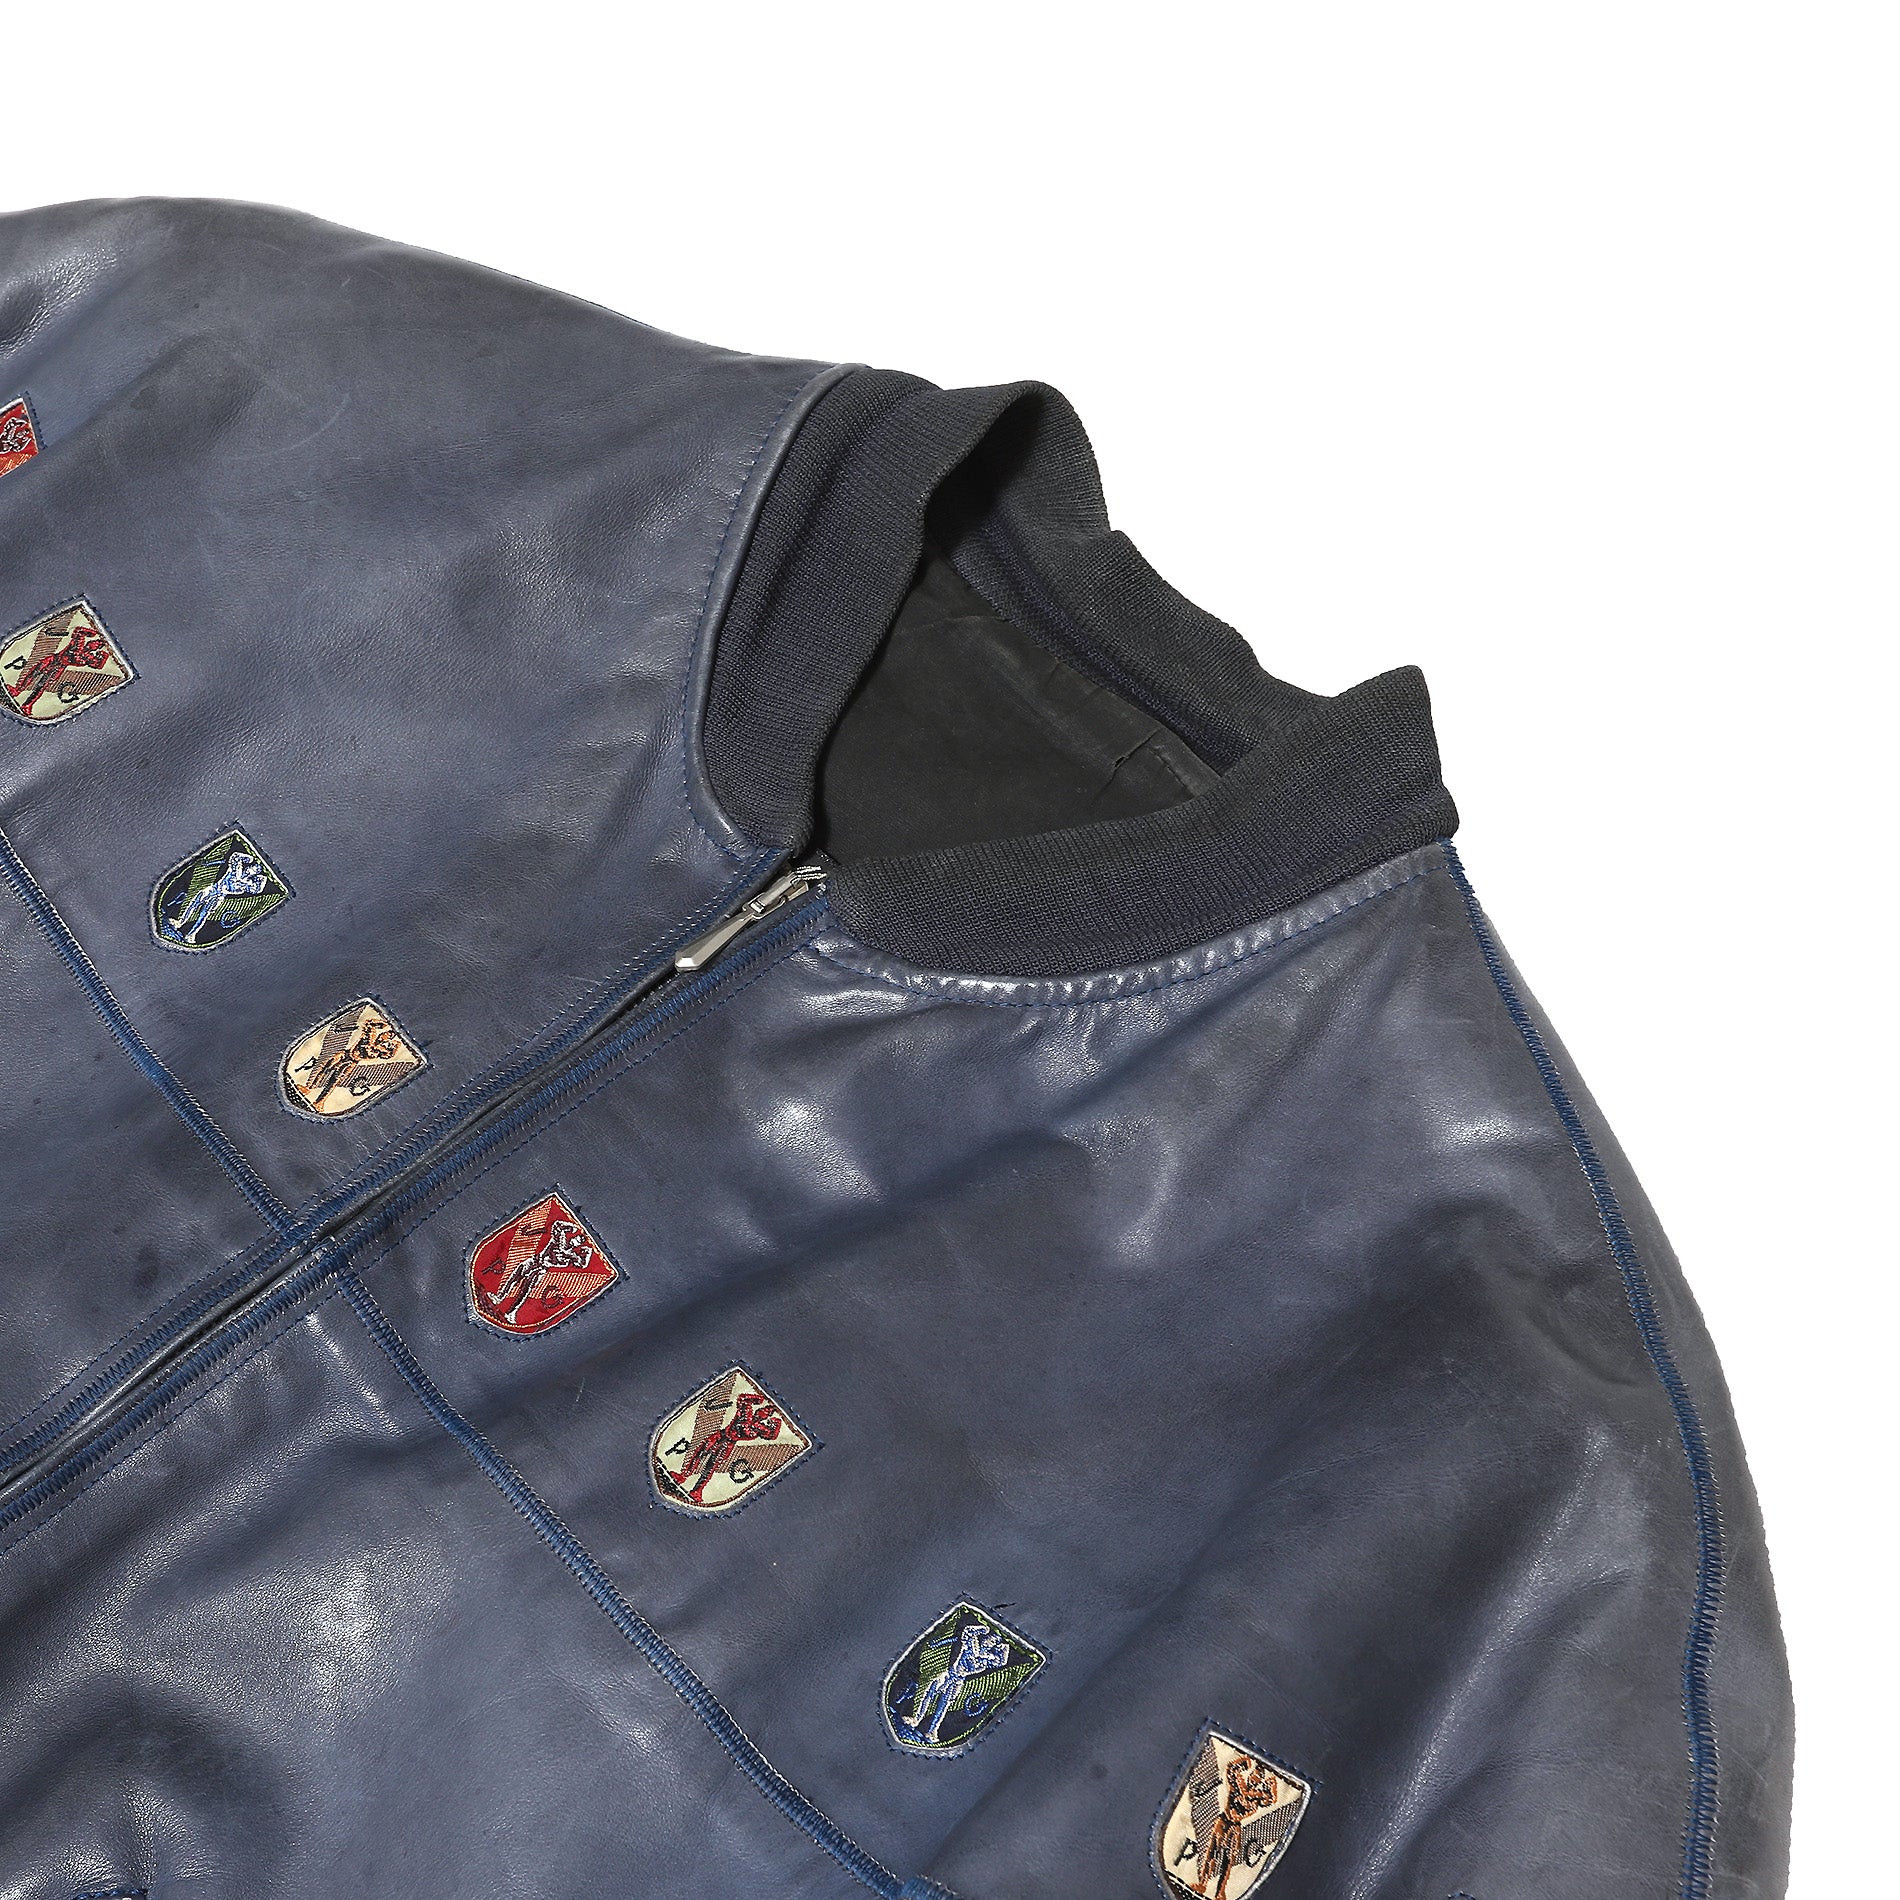 Jean Paul Gaultier AW87 Patched Leather Bomber Jacket.